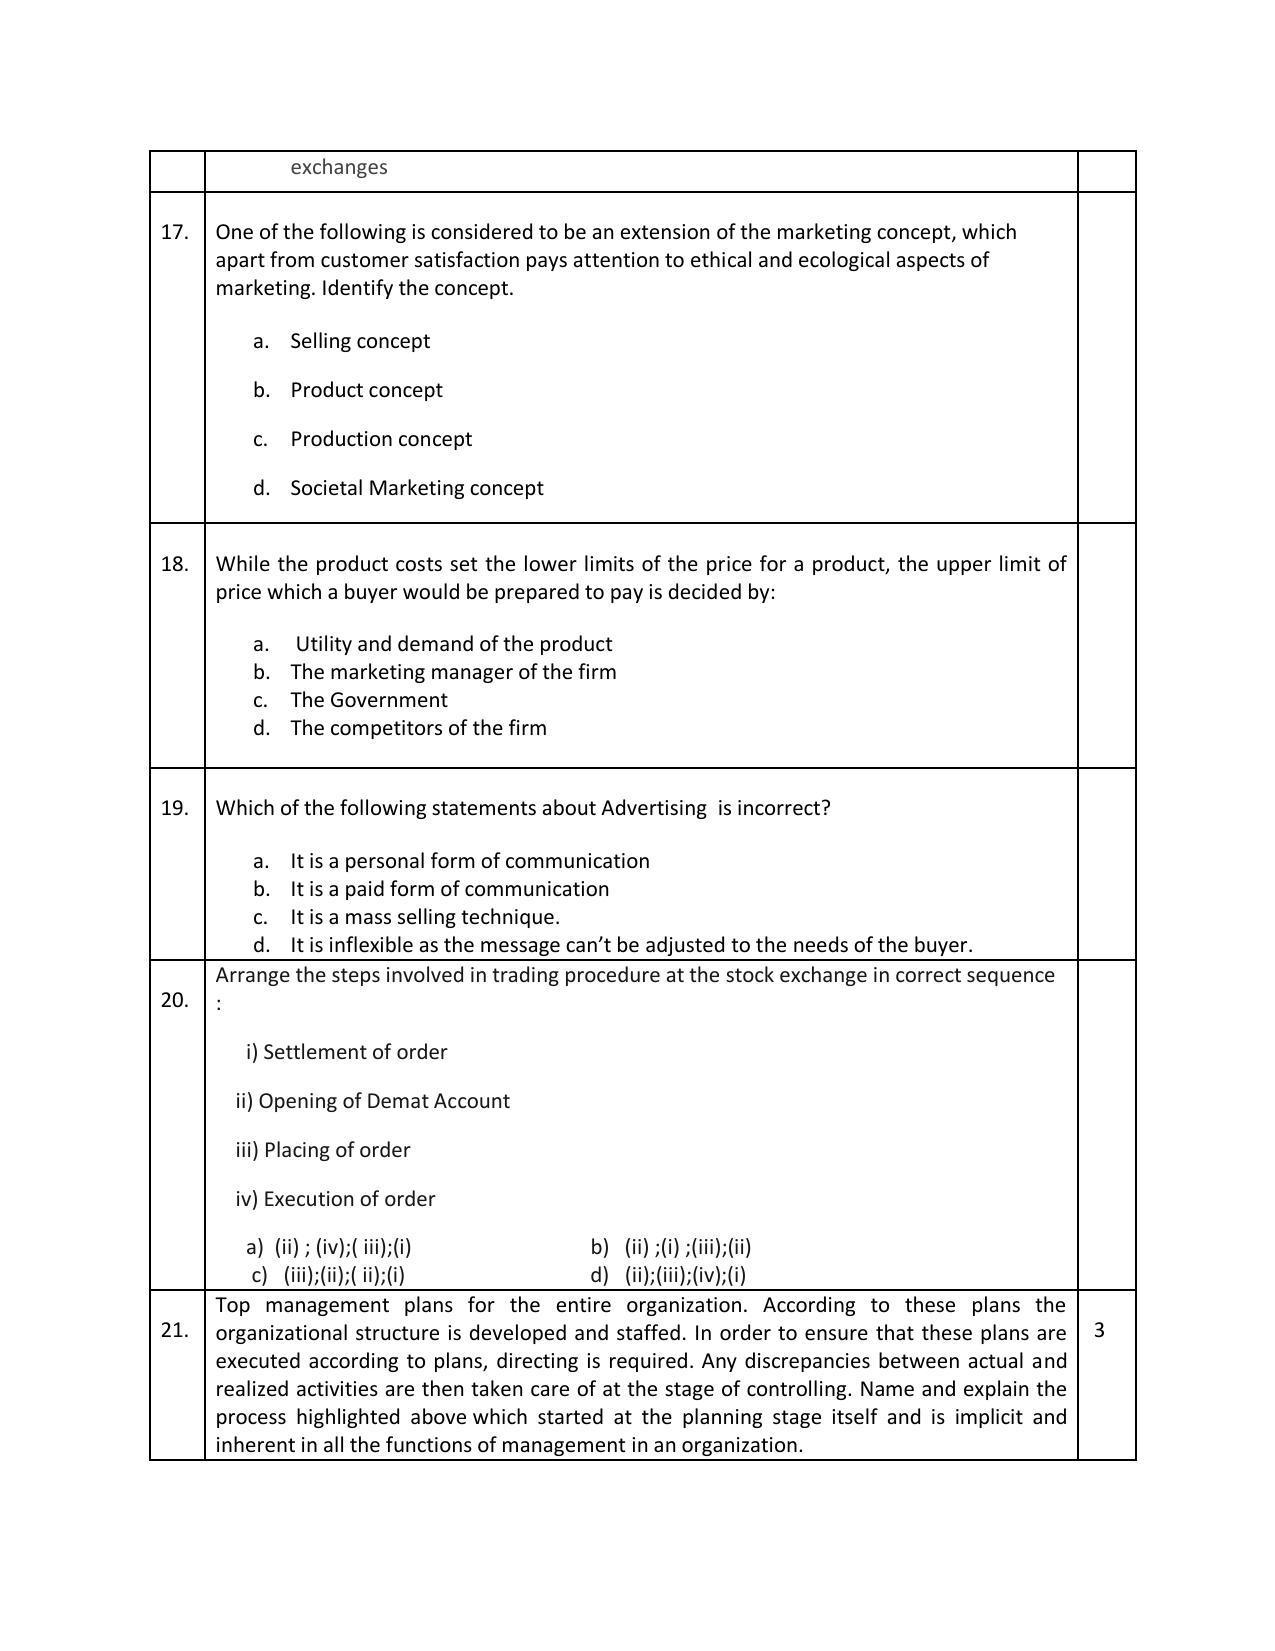 CBSE Class 12 Business Studies Sample Paper 2023 - Page 5